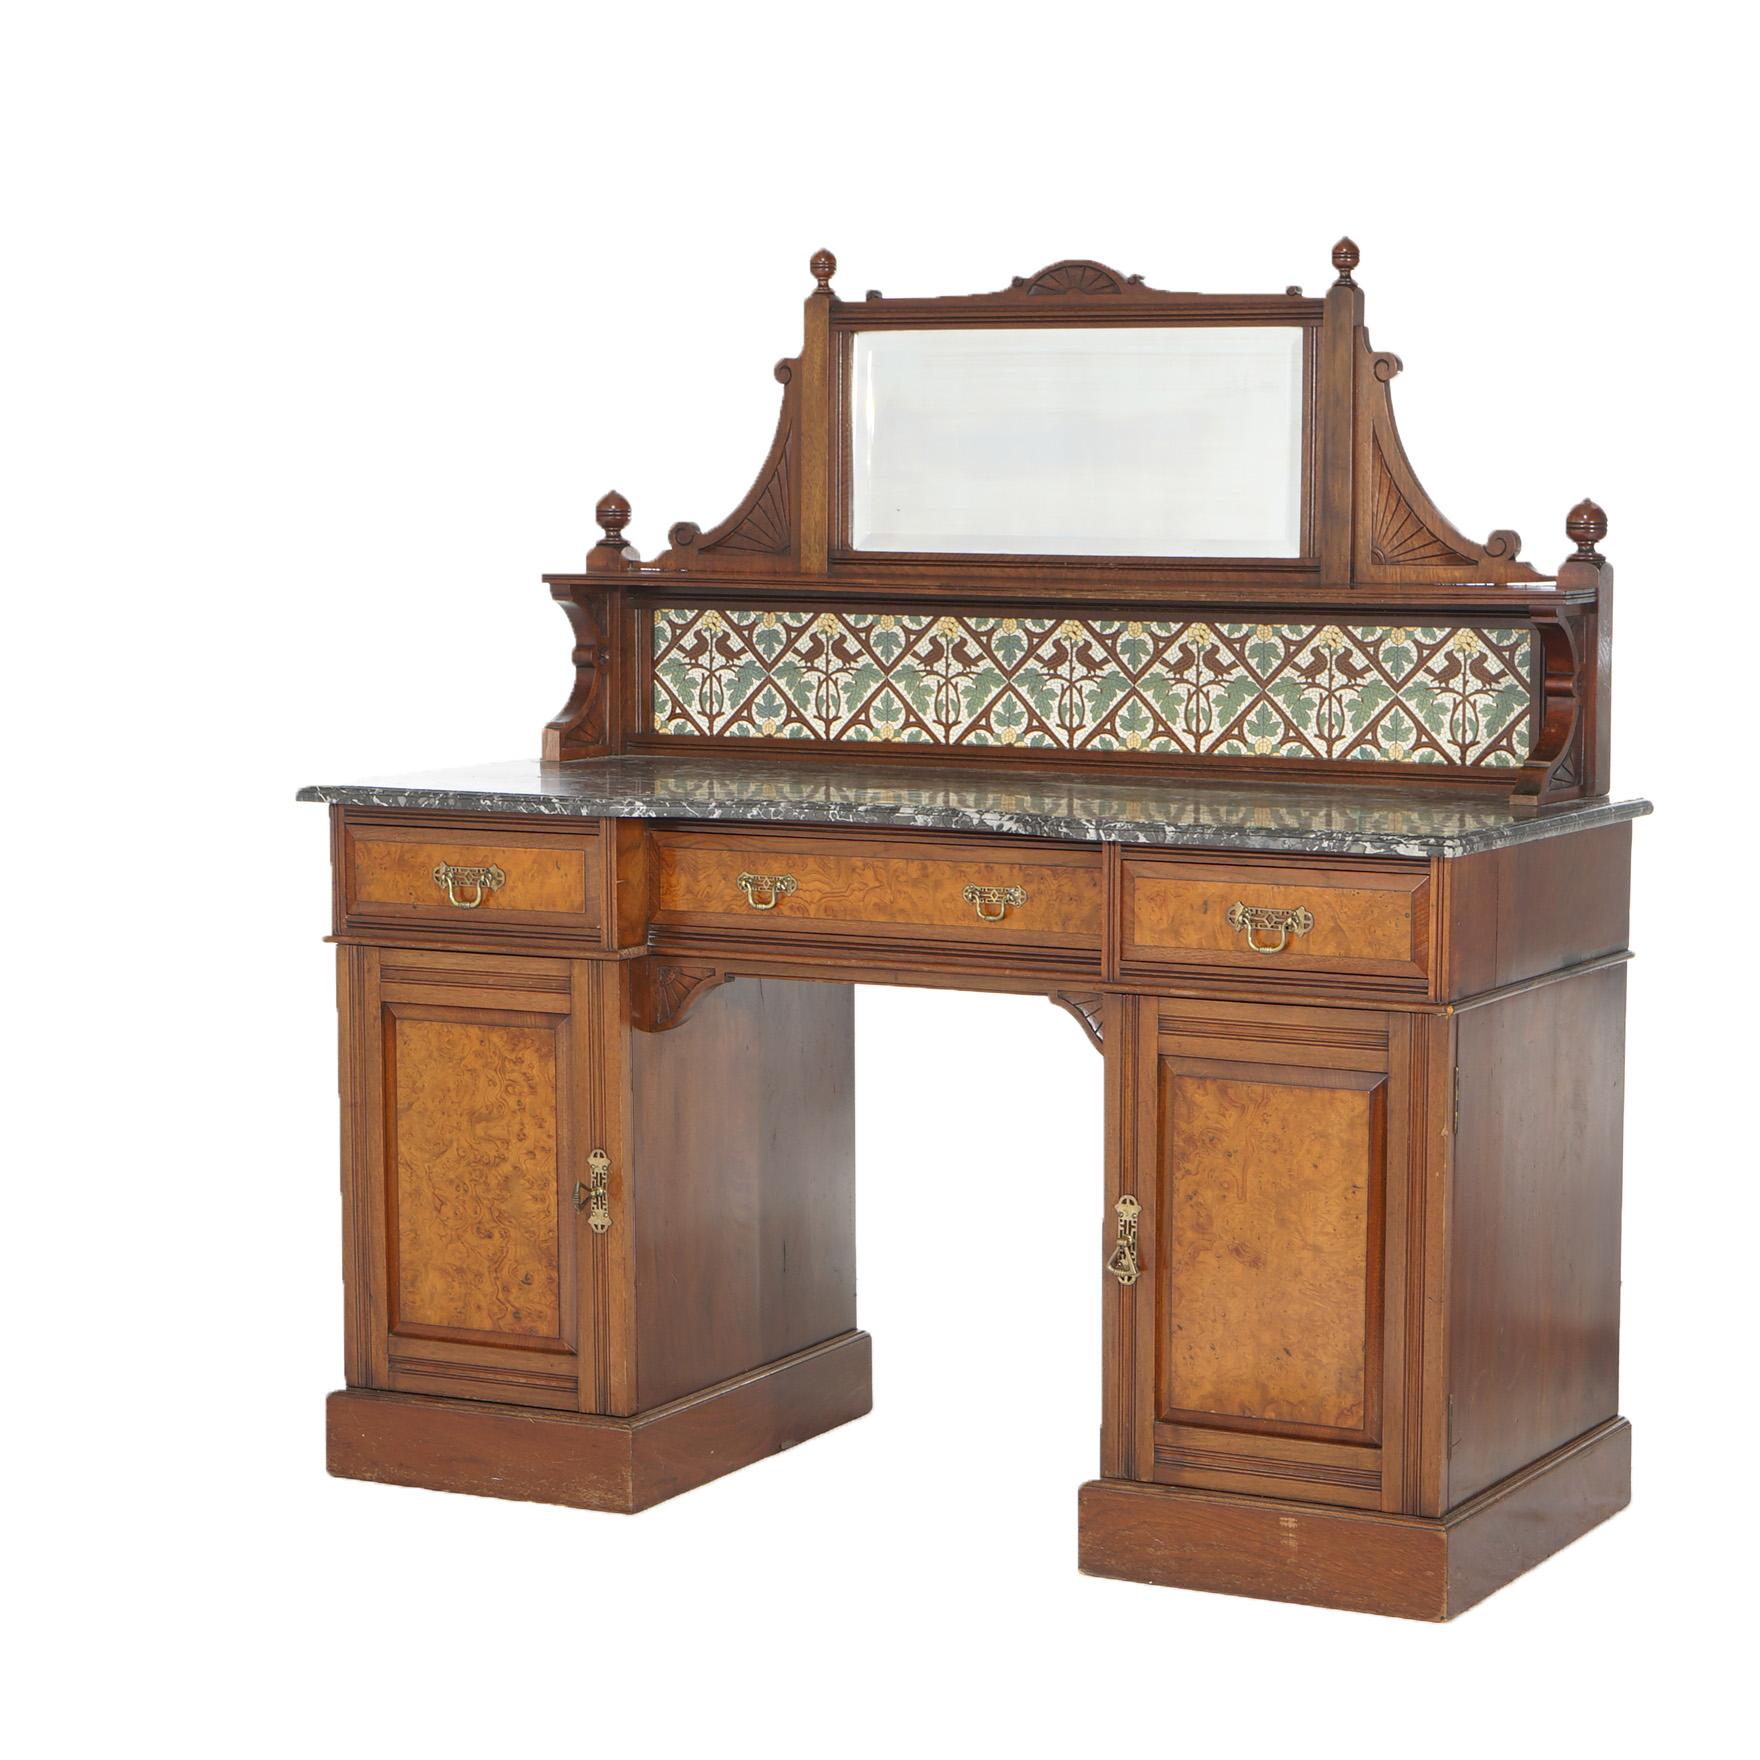 Antique Aesthetic Walnut & Burl Marble Top & Mirrored Dressing Table with Bird & Leaf Tiles, c1890

Measures - 52